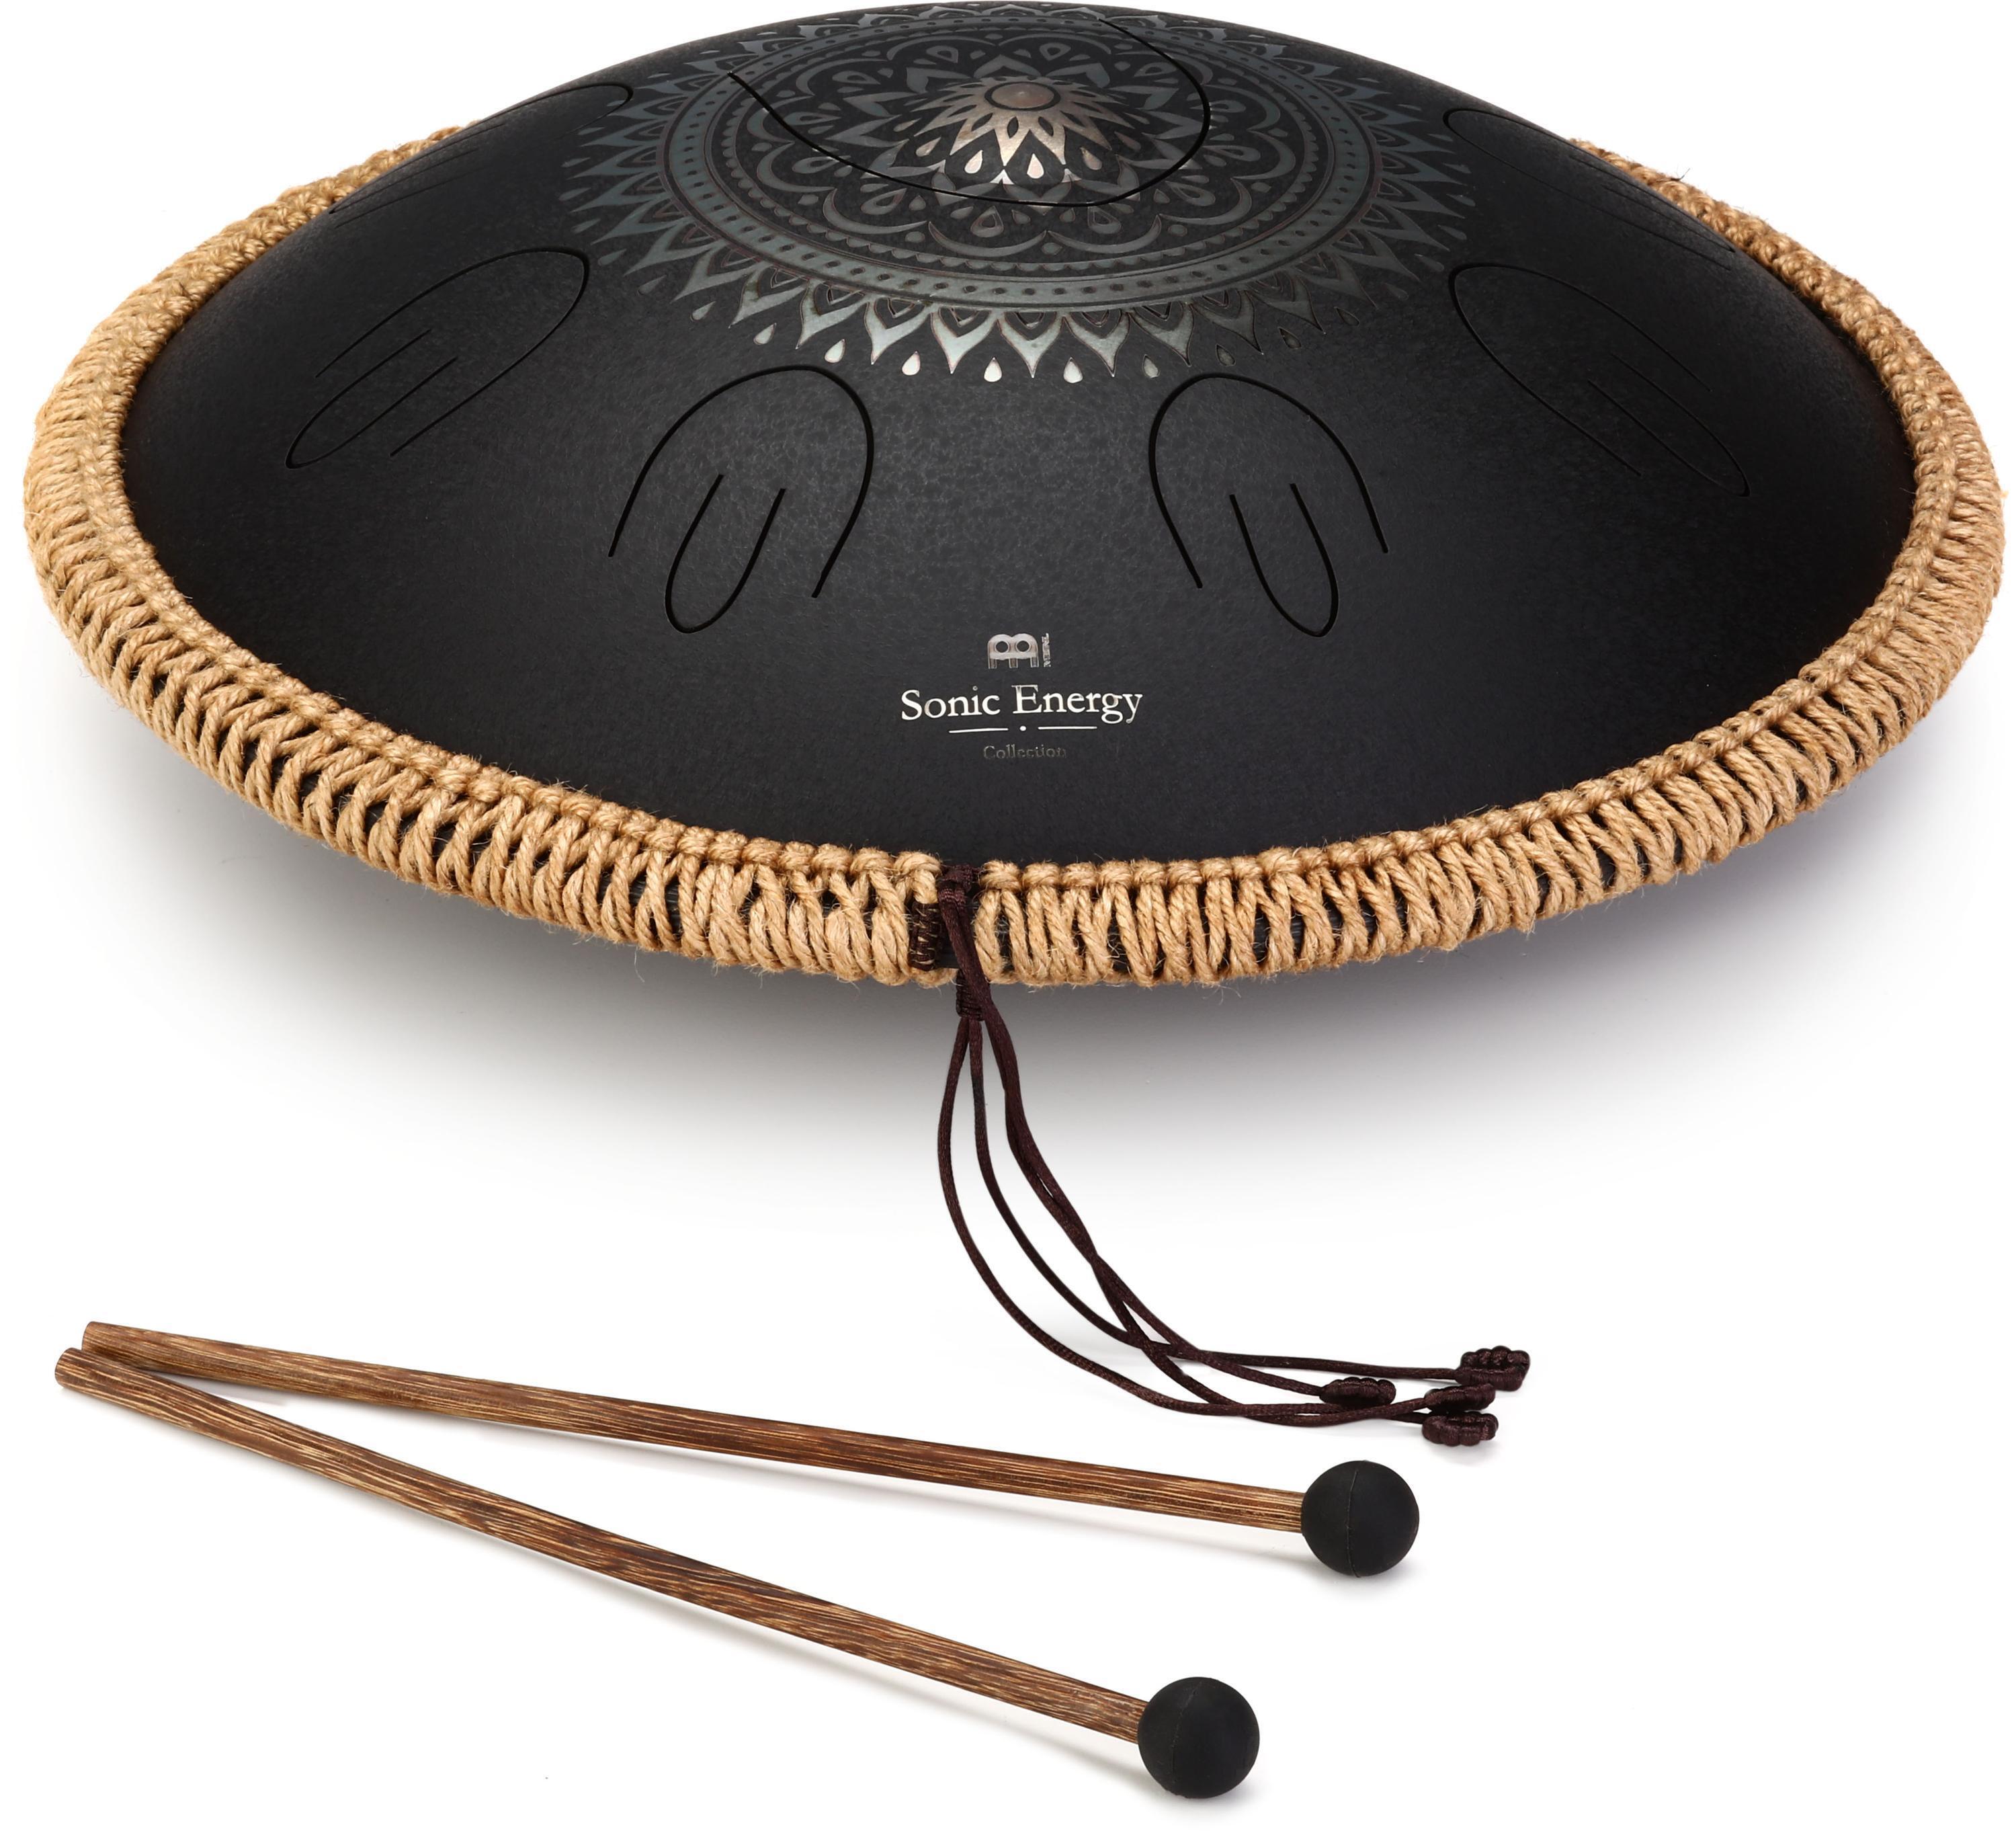 Steel Tongue Drum by Meinl Sonic Energy: 4 Scales in 3 Colors